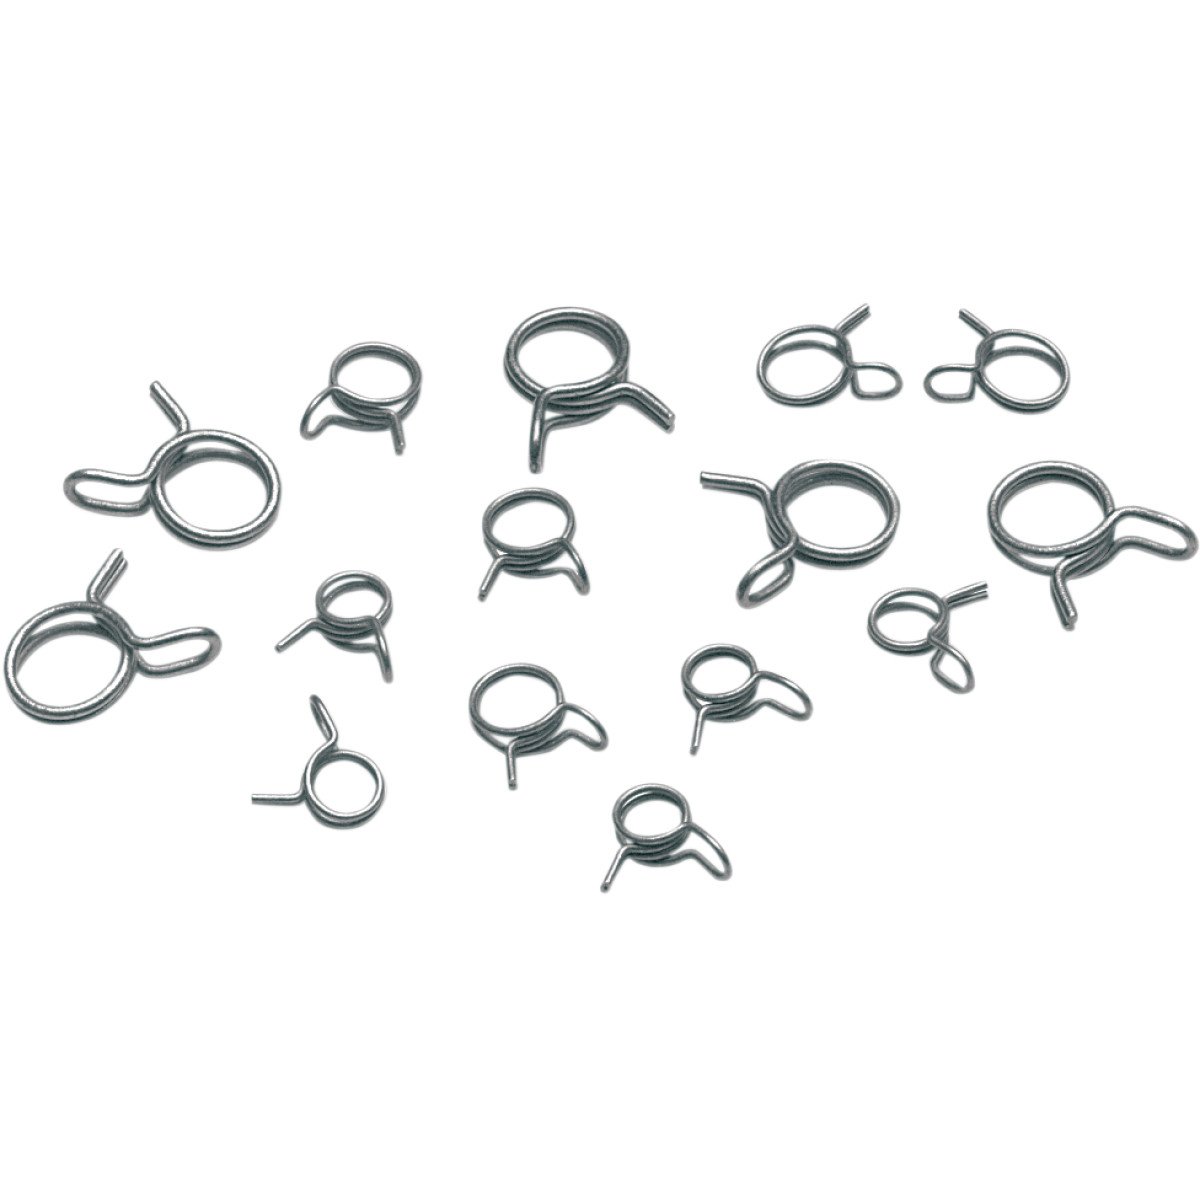 Moose Racing Hose Clamps  for fuel lines, 15 pieces, 1/4, 5/16, 7/16 Inches